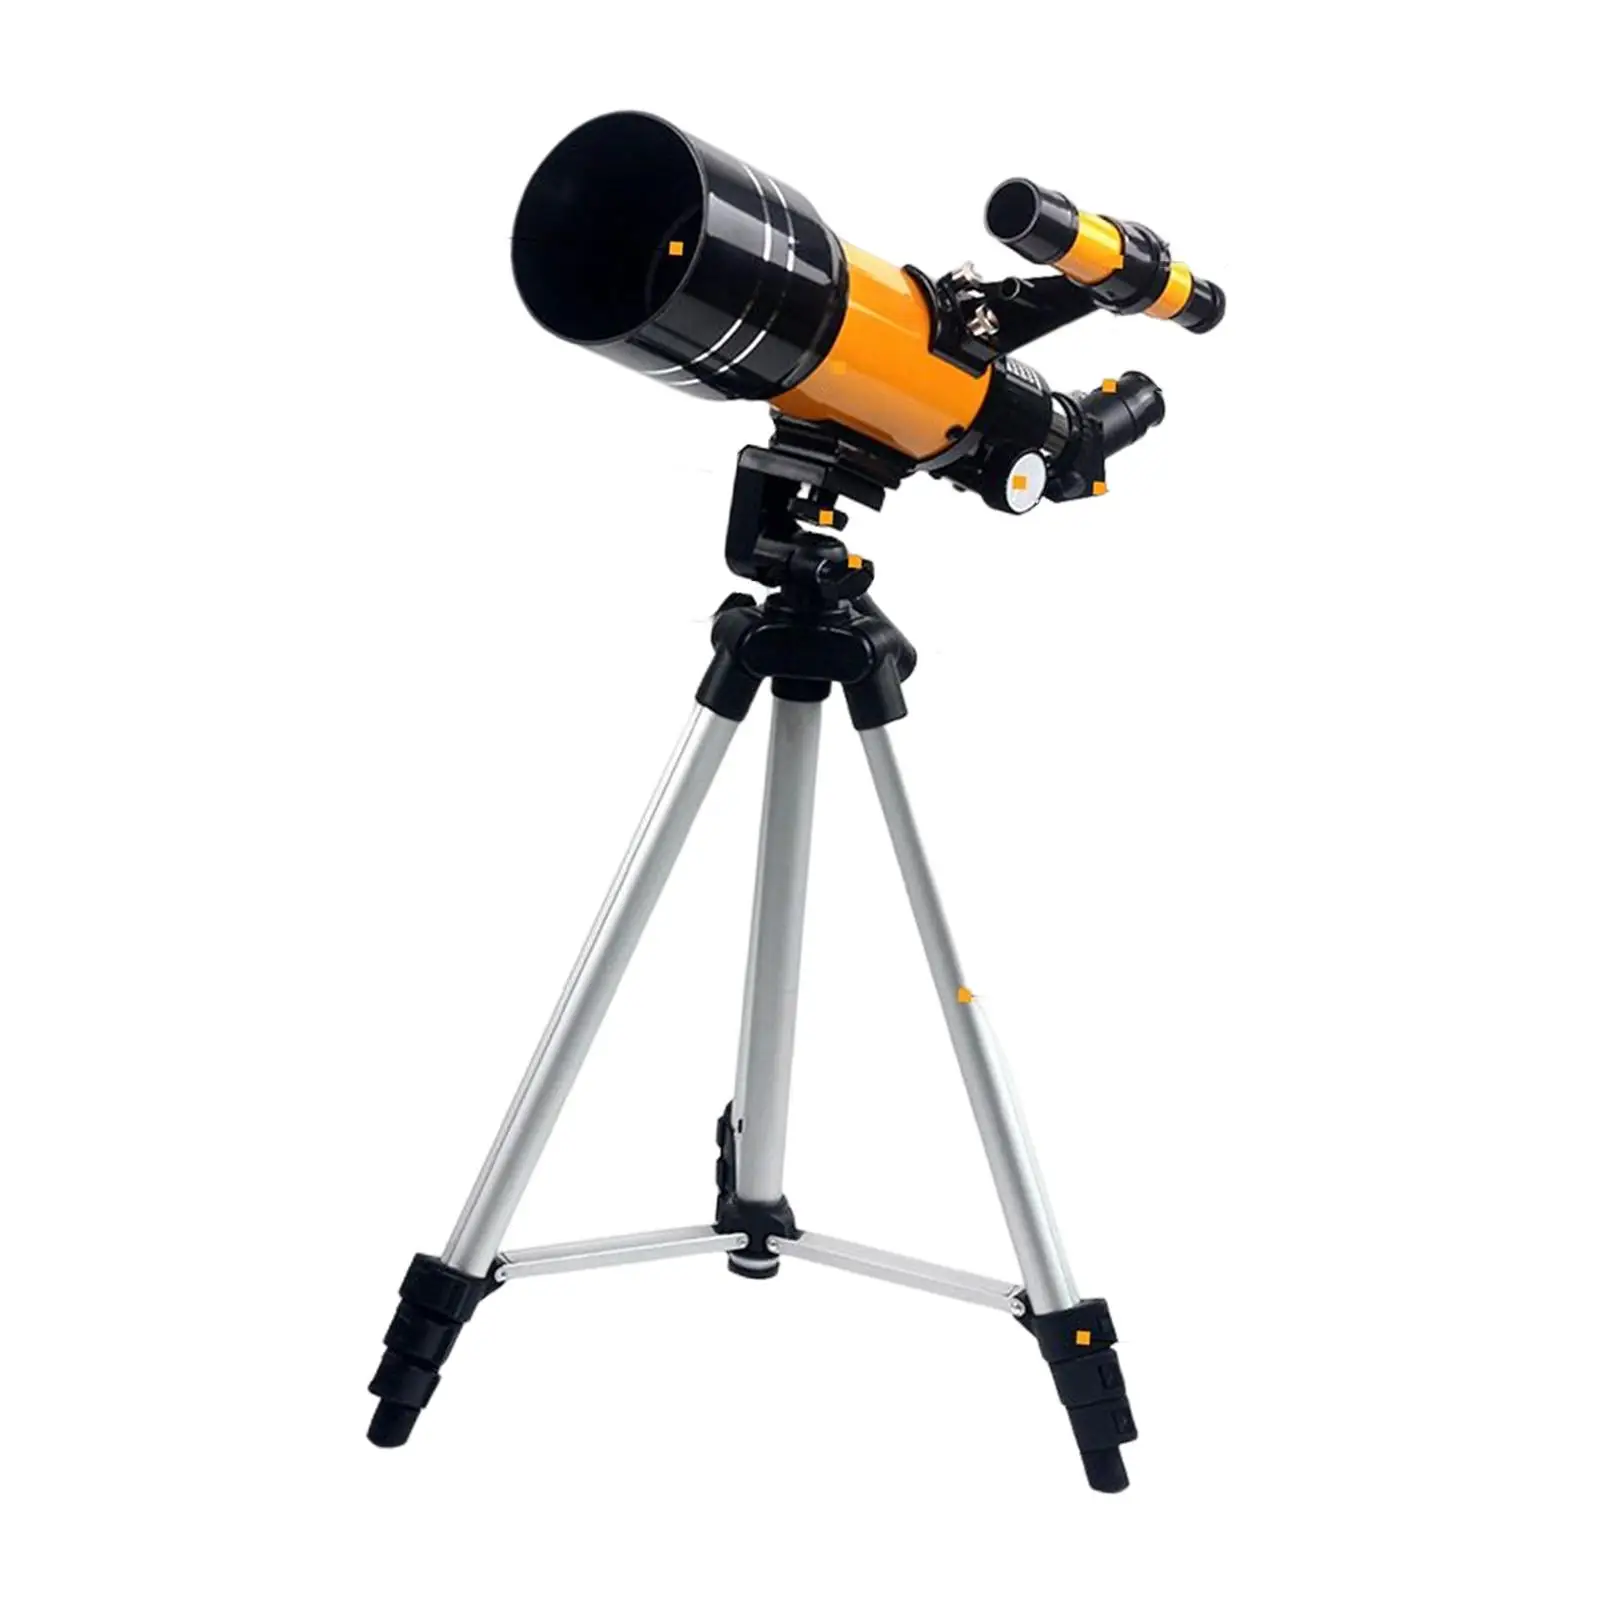 Telescope 70mm apertures 300mm Astronomical Refractor Telescopes for Adults Kids Astronomy Beginners